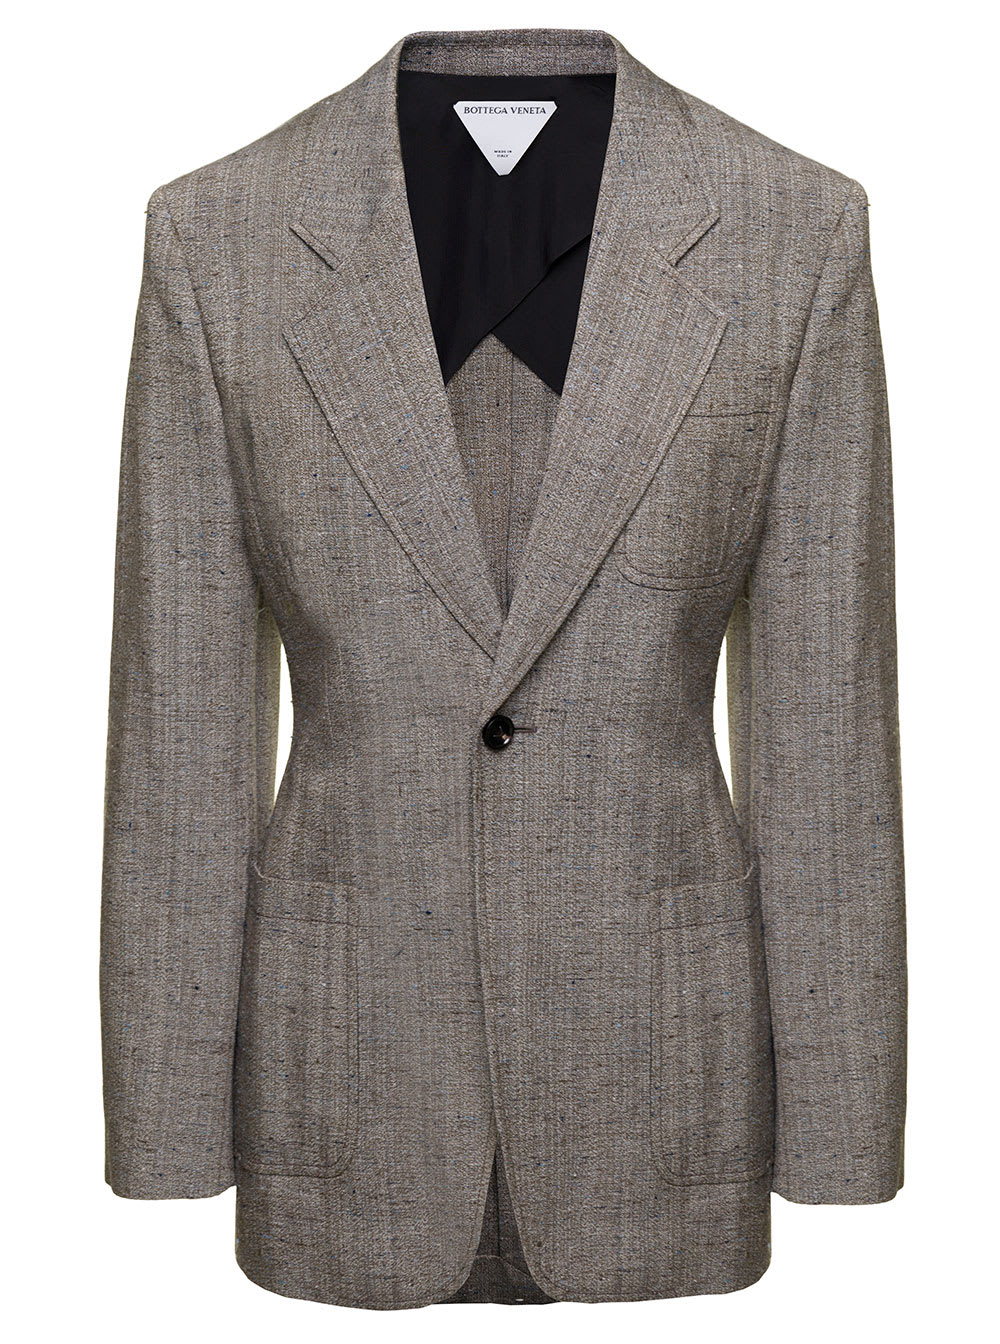 Bottega Veneta Grey Single-breasted Slim-fitted Jacket With Single Button In Viscose Blend Woman